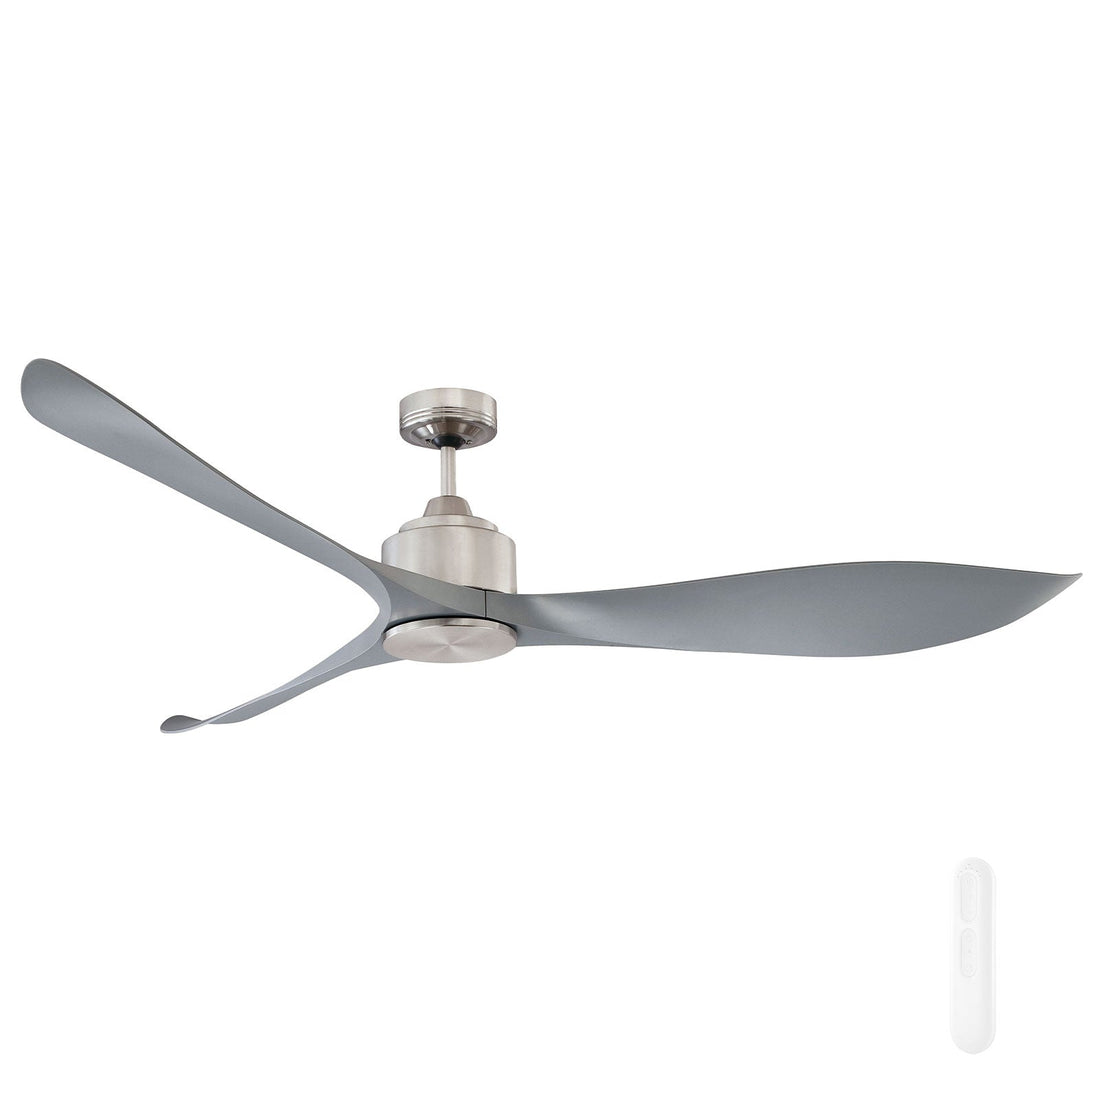 Eagle XL DC Ceiling Fan with Remote Mercator